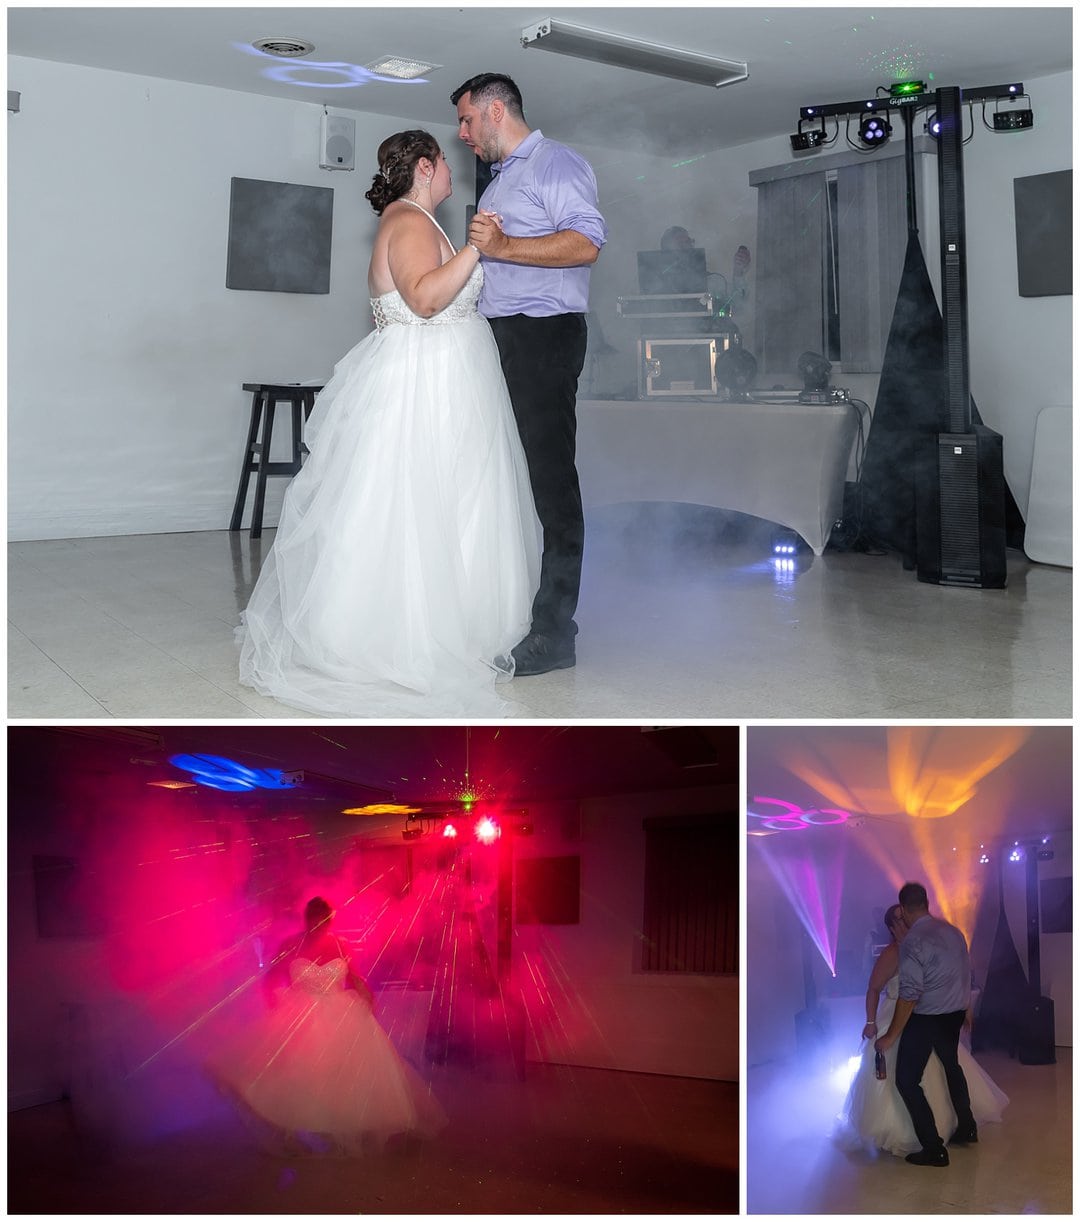 The bride and groom dance together during their wedding reception.